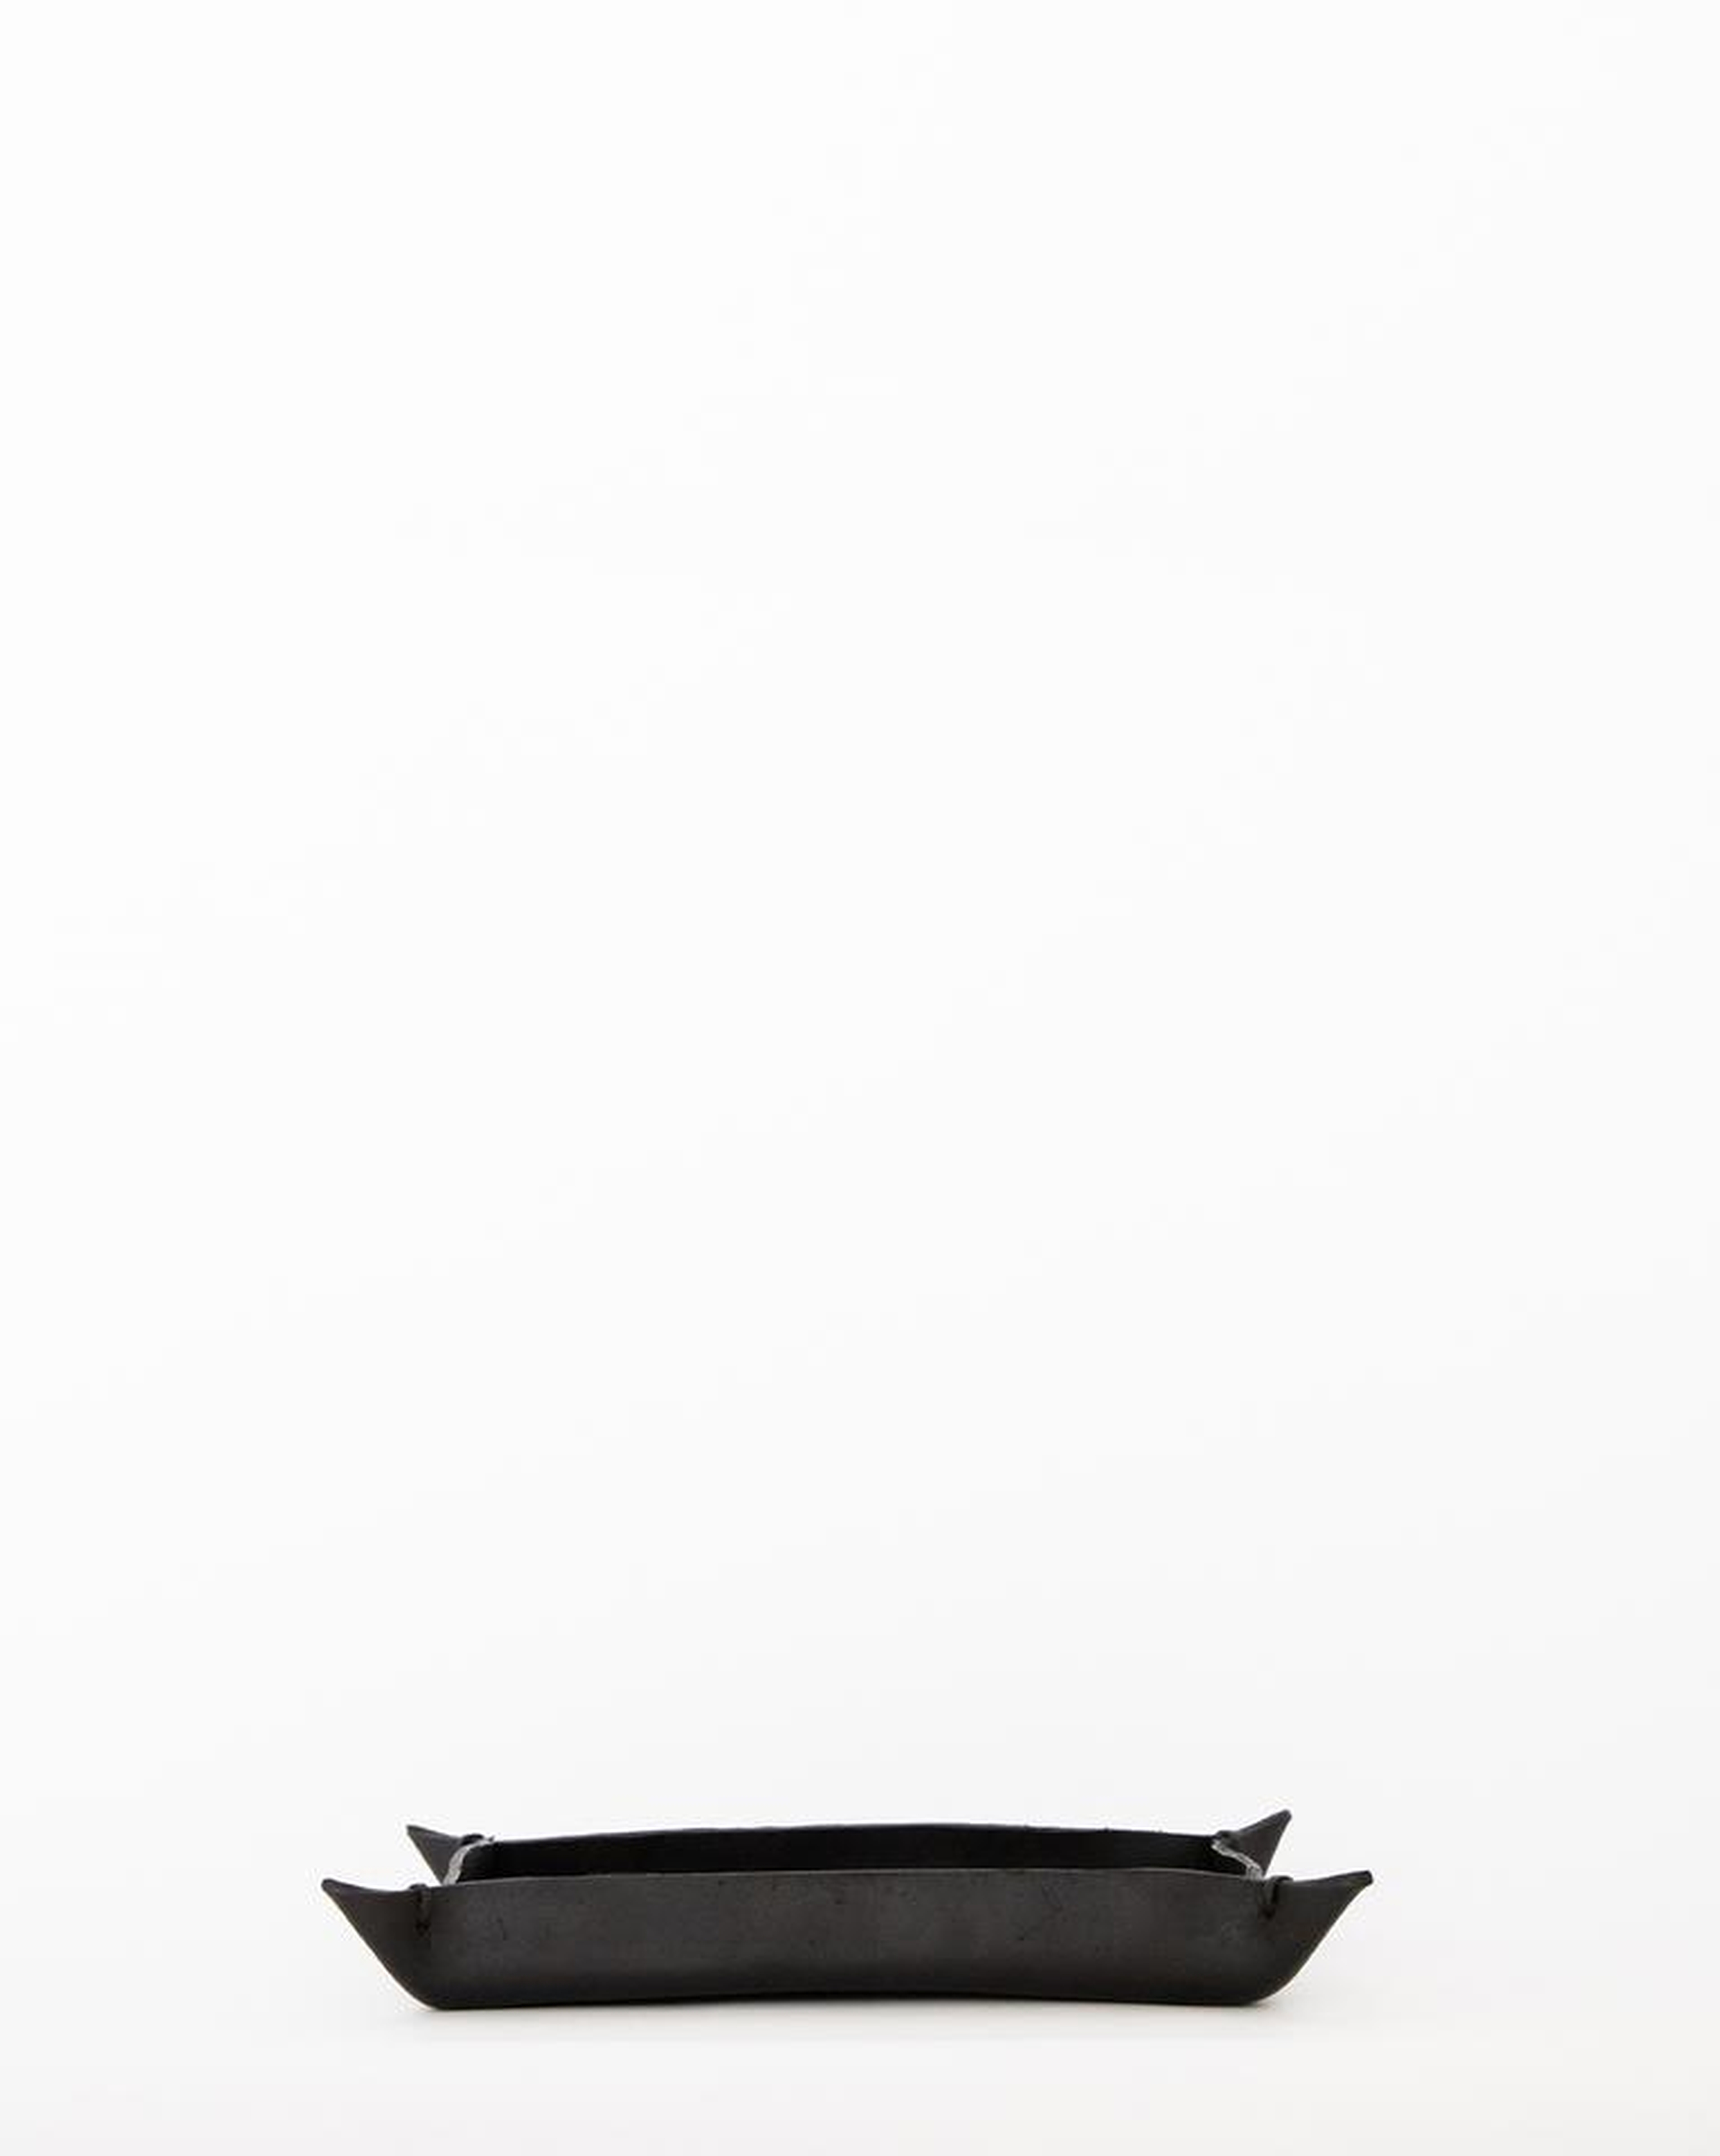 LEATHER CRAFTED TRAY - black, small - McGee & Co.